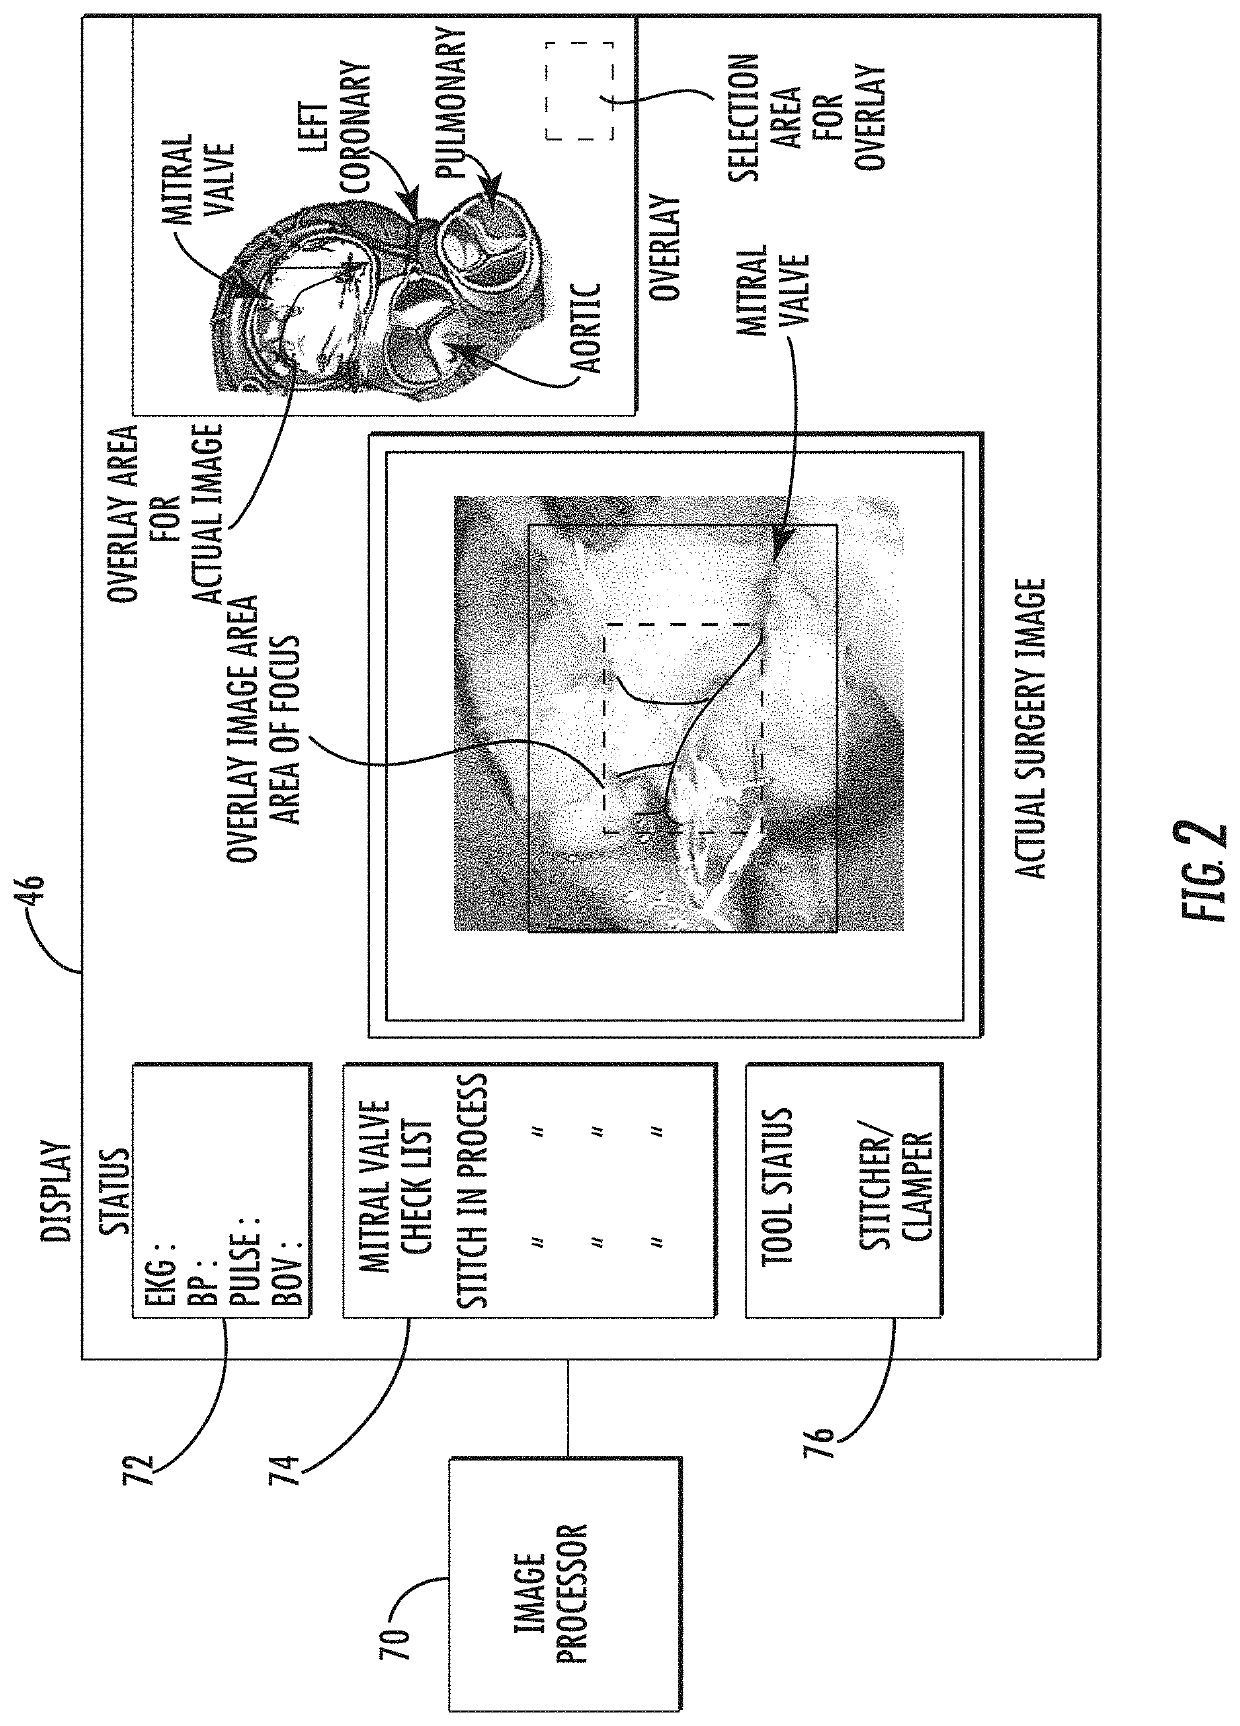 Surgical simulation system using force sensing and optical tracking and robotic surgery system